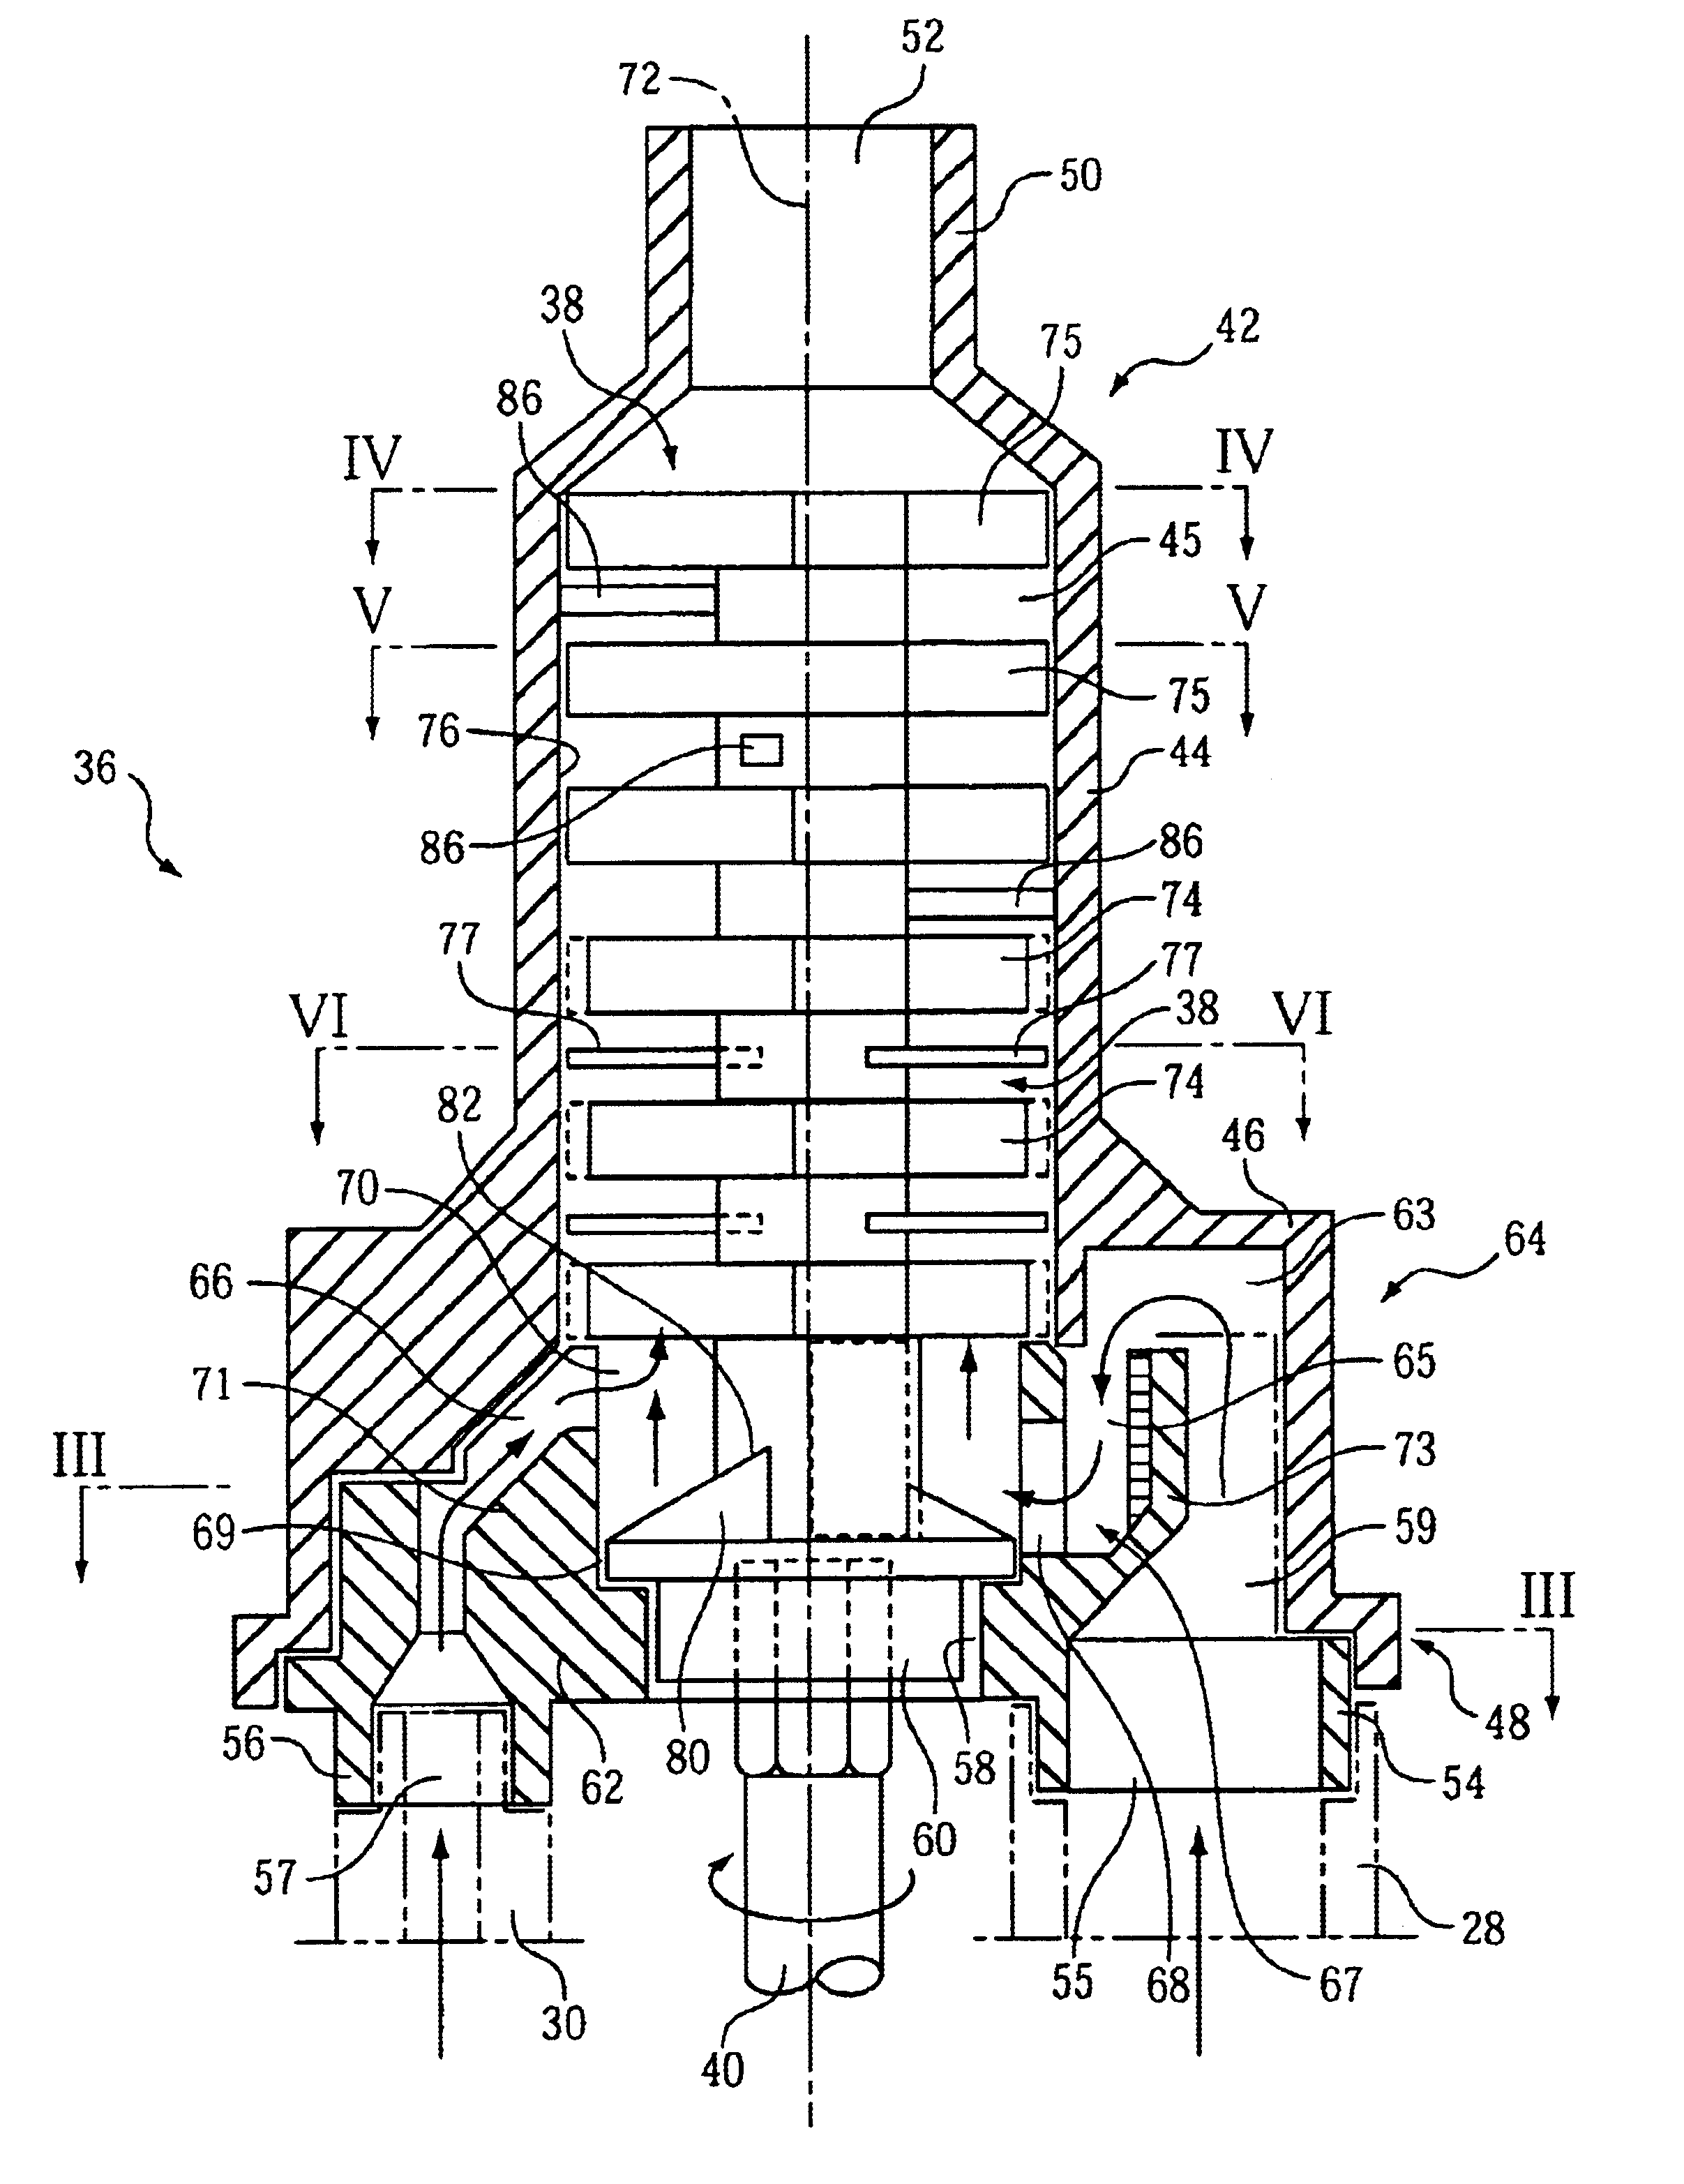 Device for mixing two paste-like compounds, in particular for mixing a dental-molding compound with a catalyzing compound